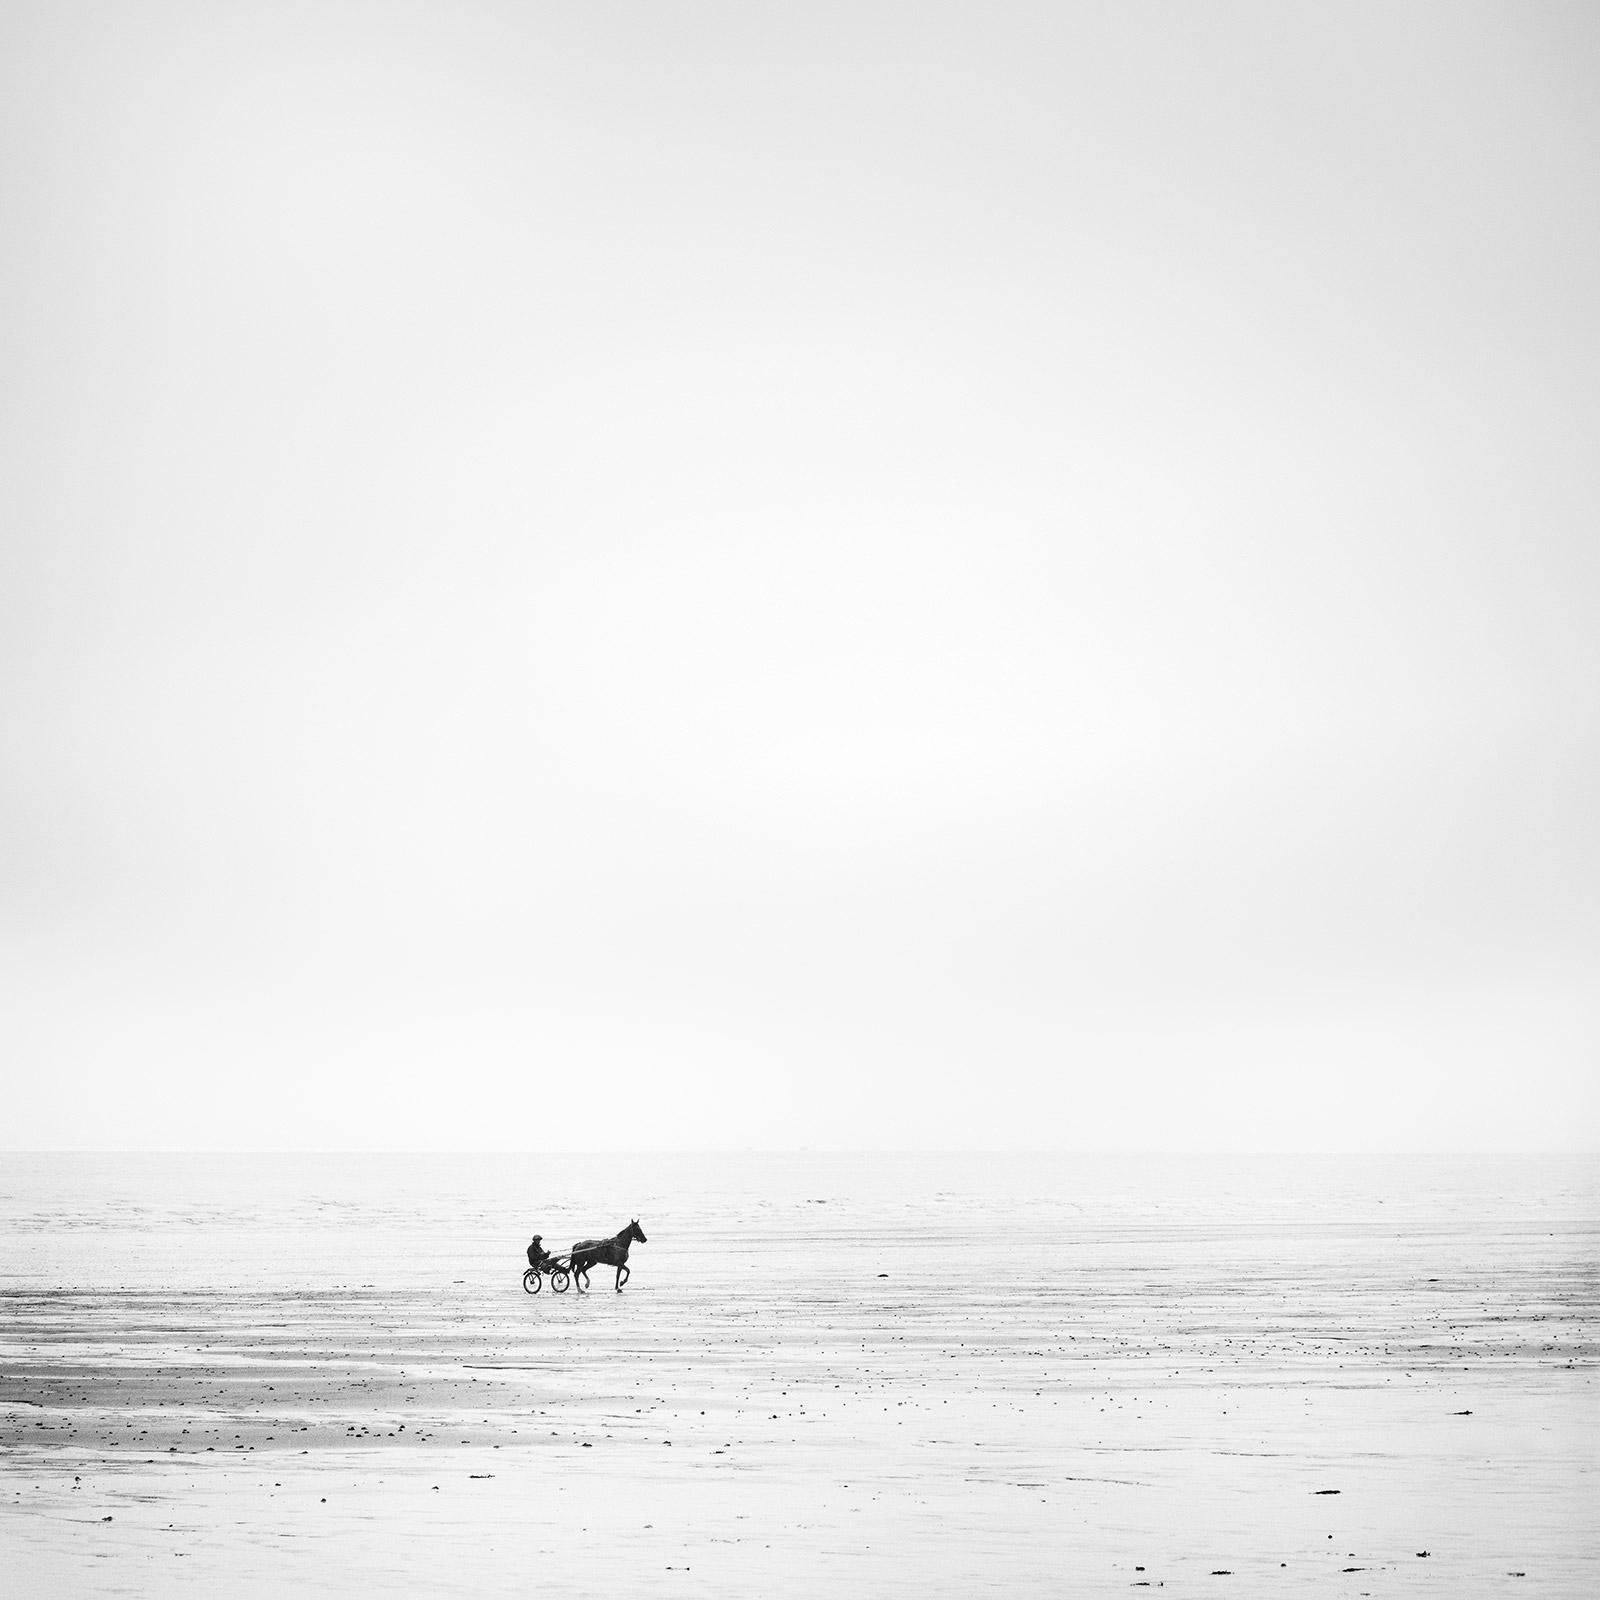 Gerald Berghammer Landscape Photograph - Harness Racing, lonely beach, horse, black and white photography, landscape, art